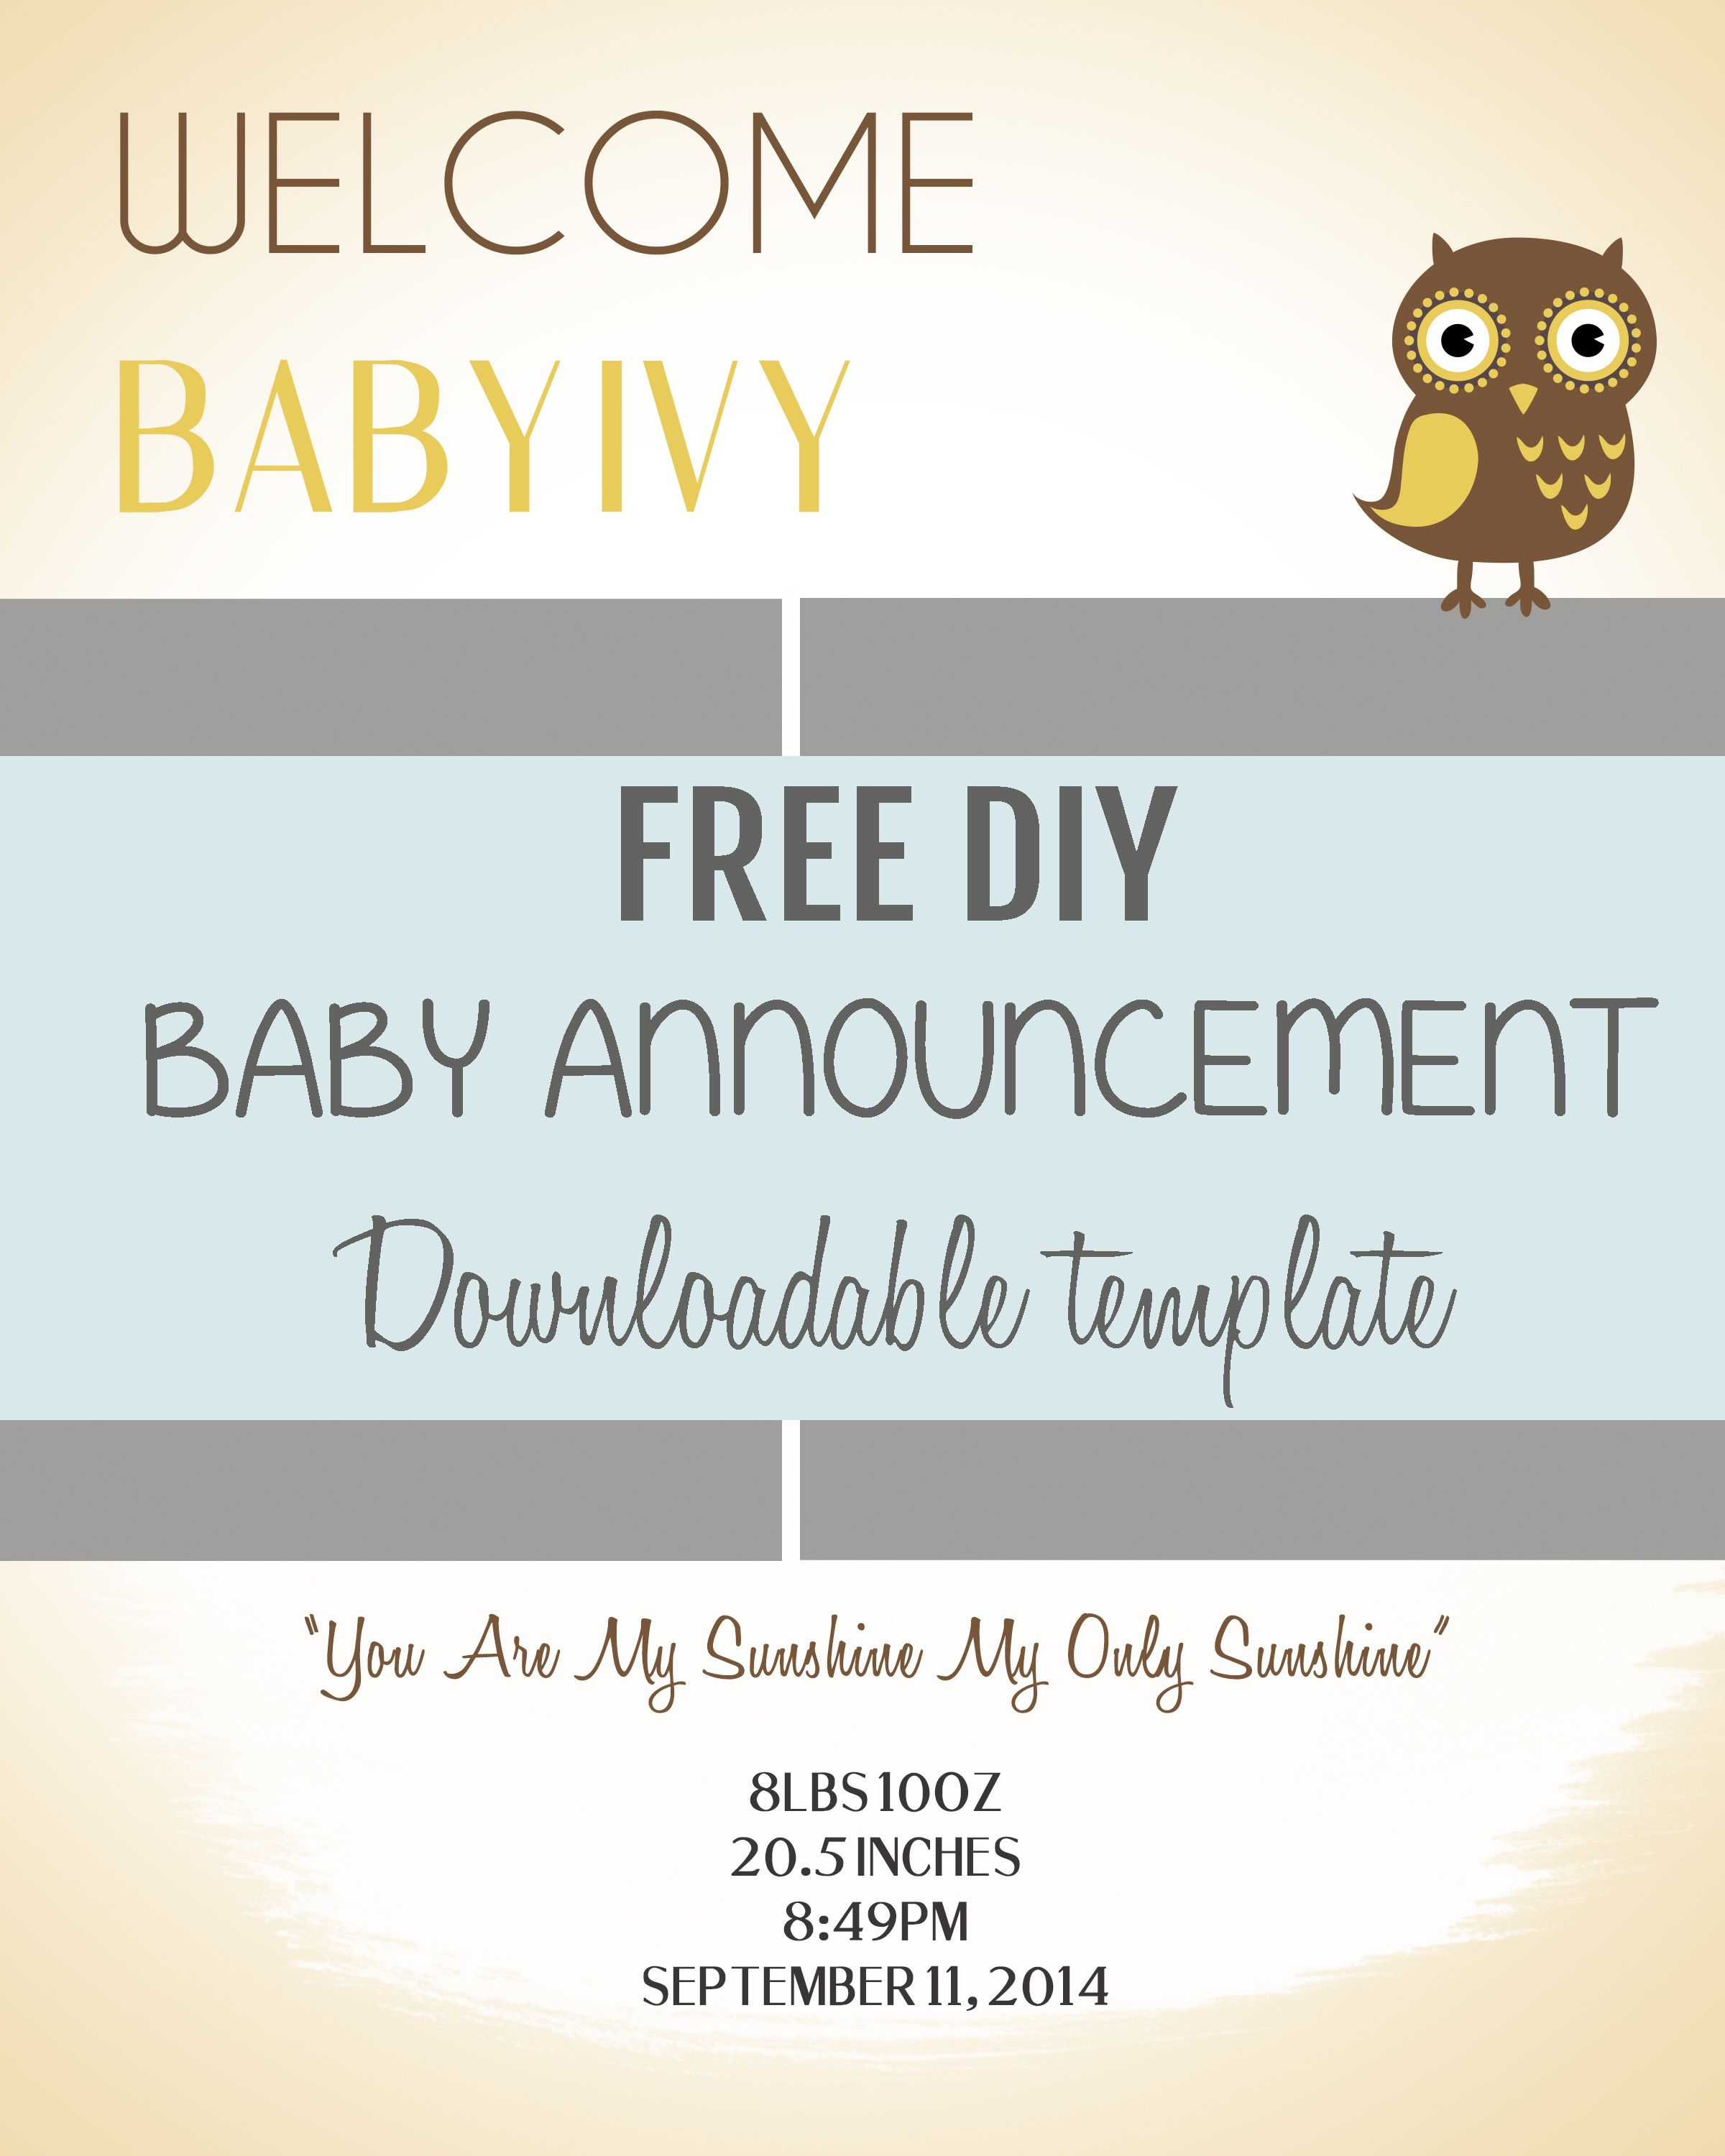 001 Free Birth Announcements Templates Template Ideas ~ Ulyssesroom - Free Birth Announcements Printable